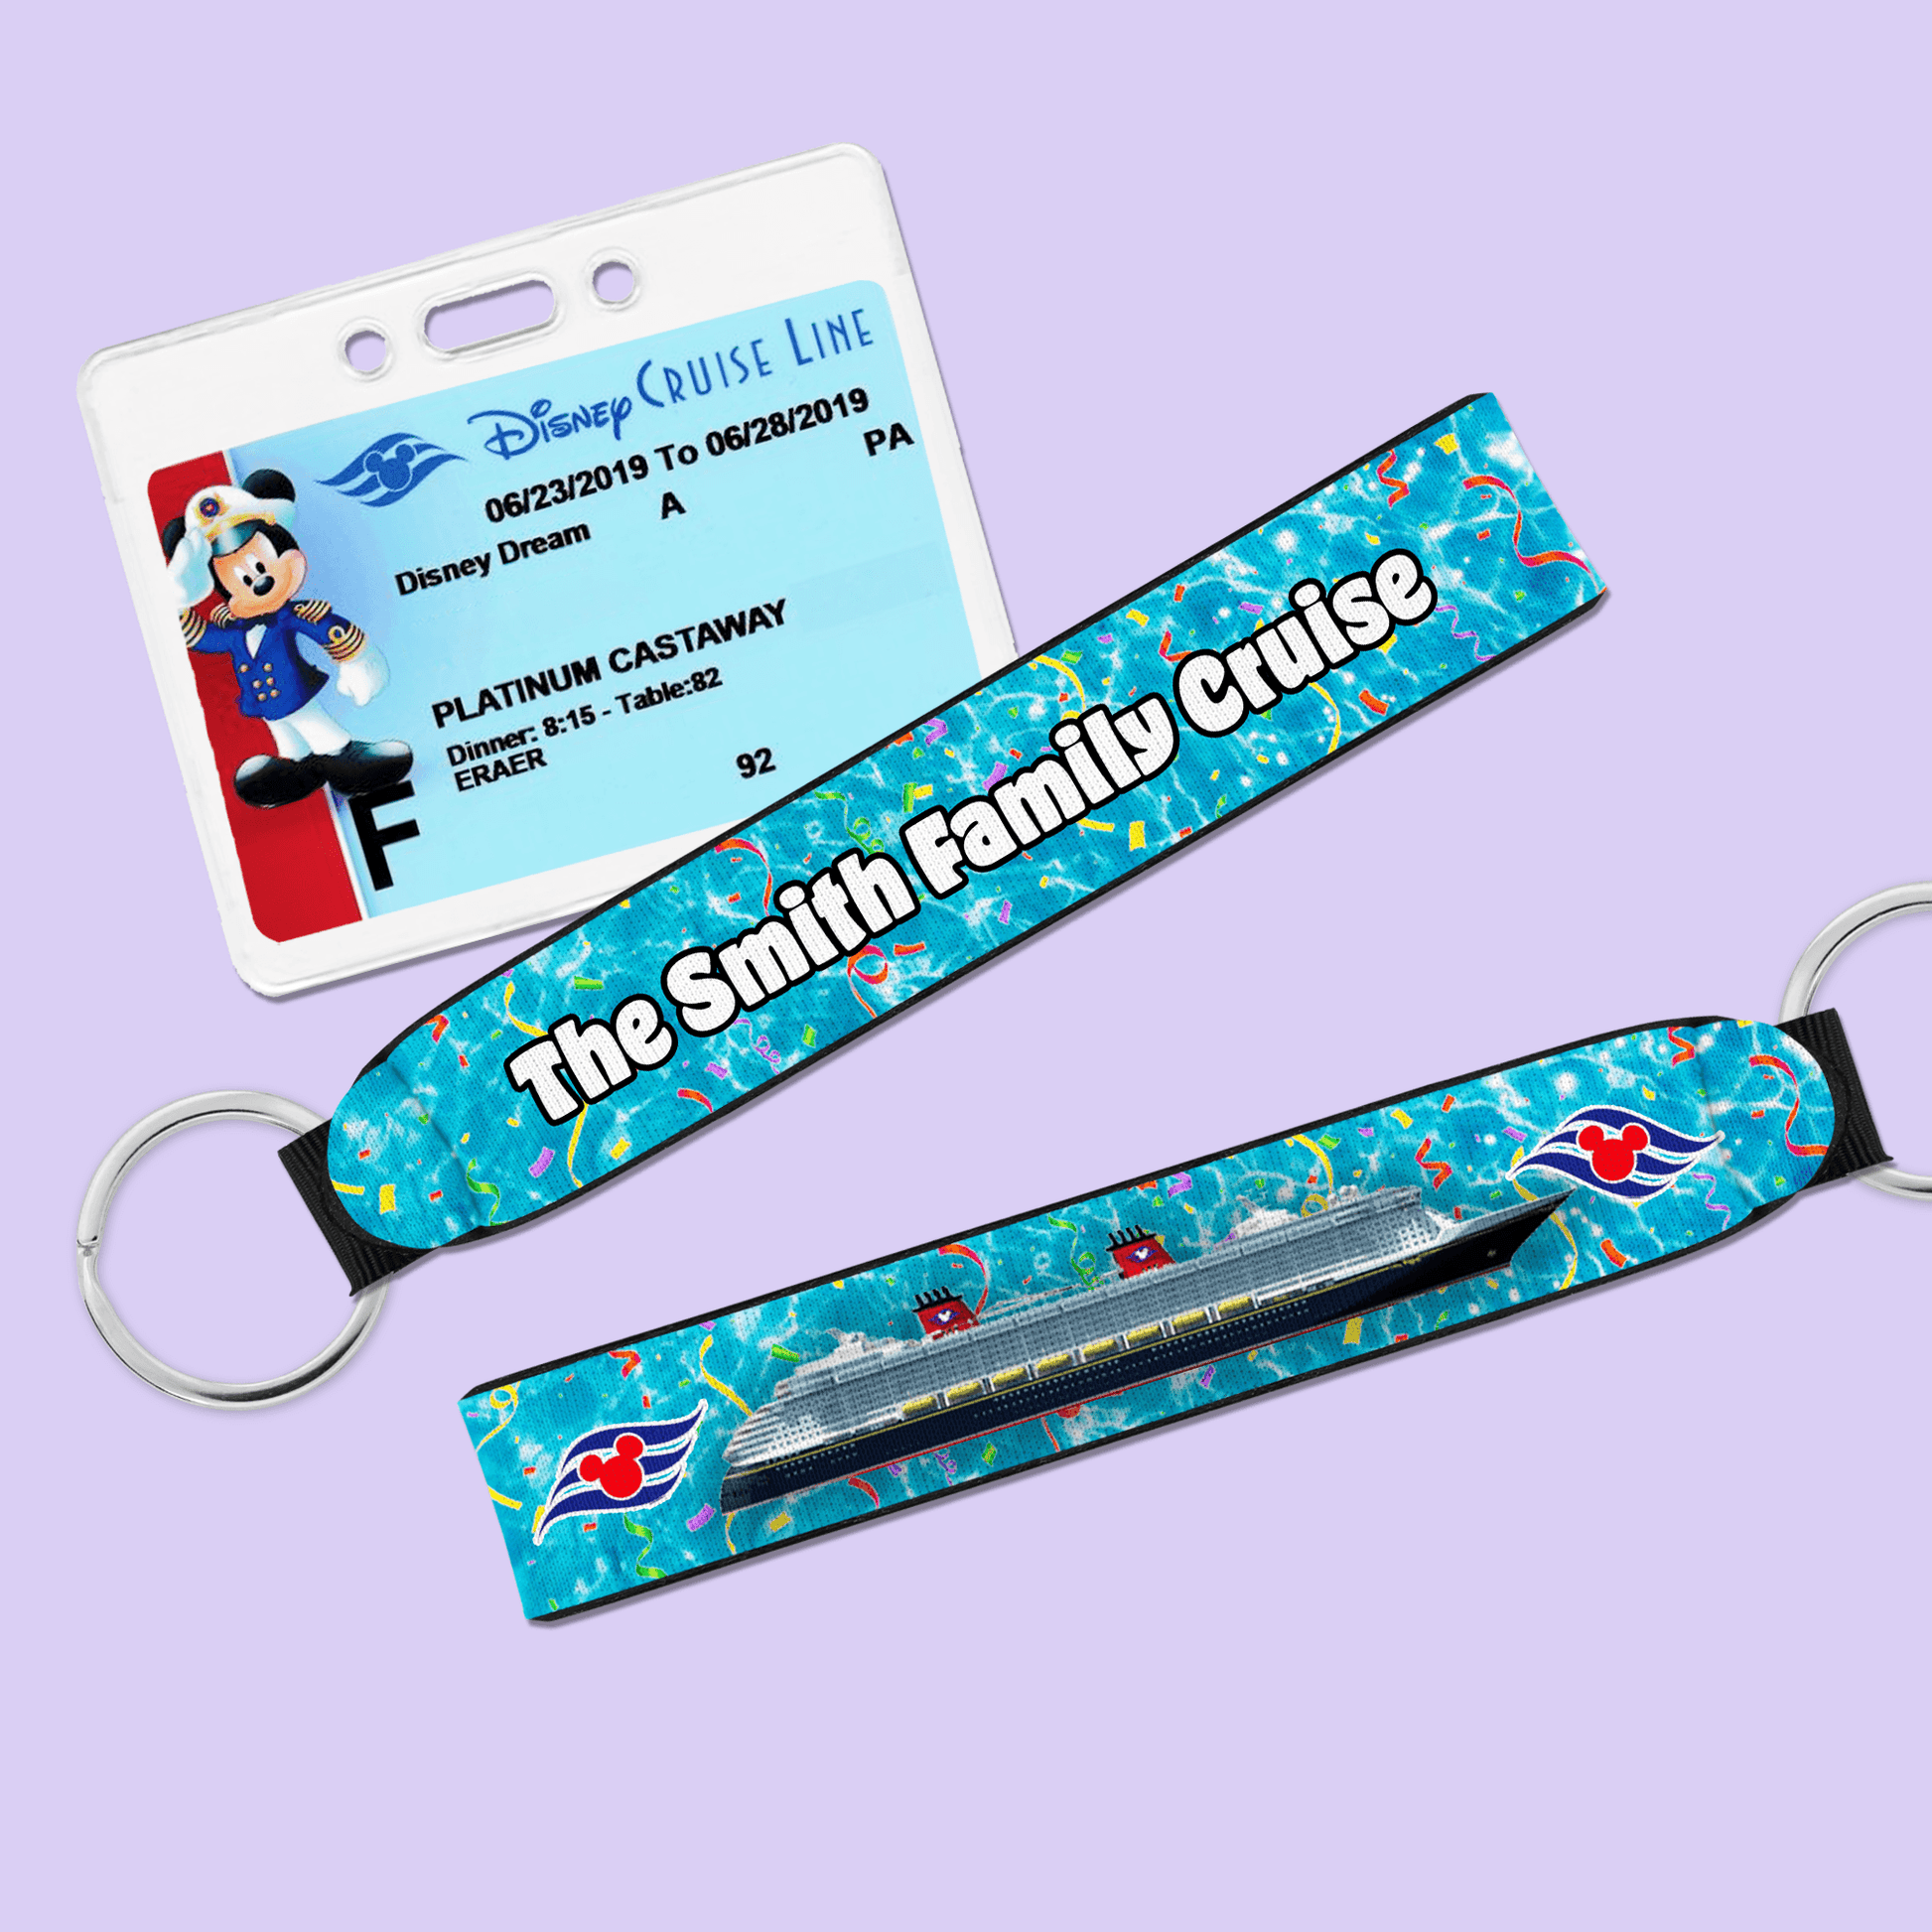 Personalized Disney Cruise Wristlet - Two Crafty Gays